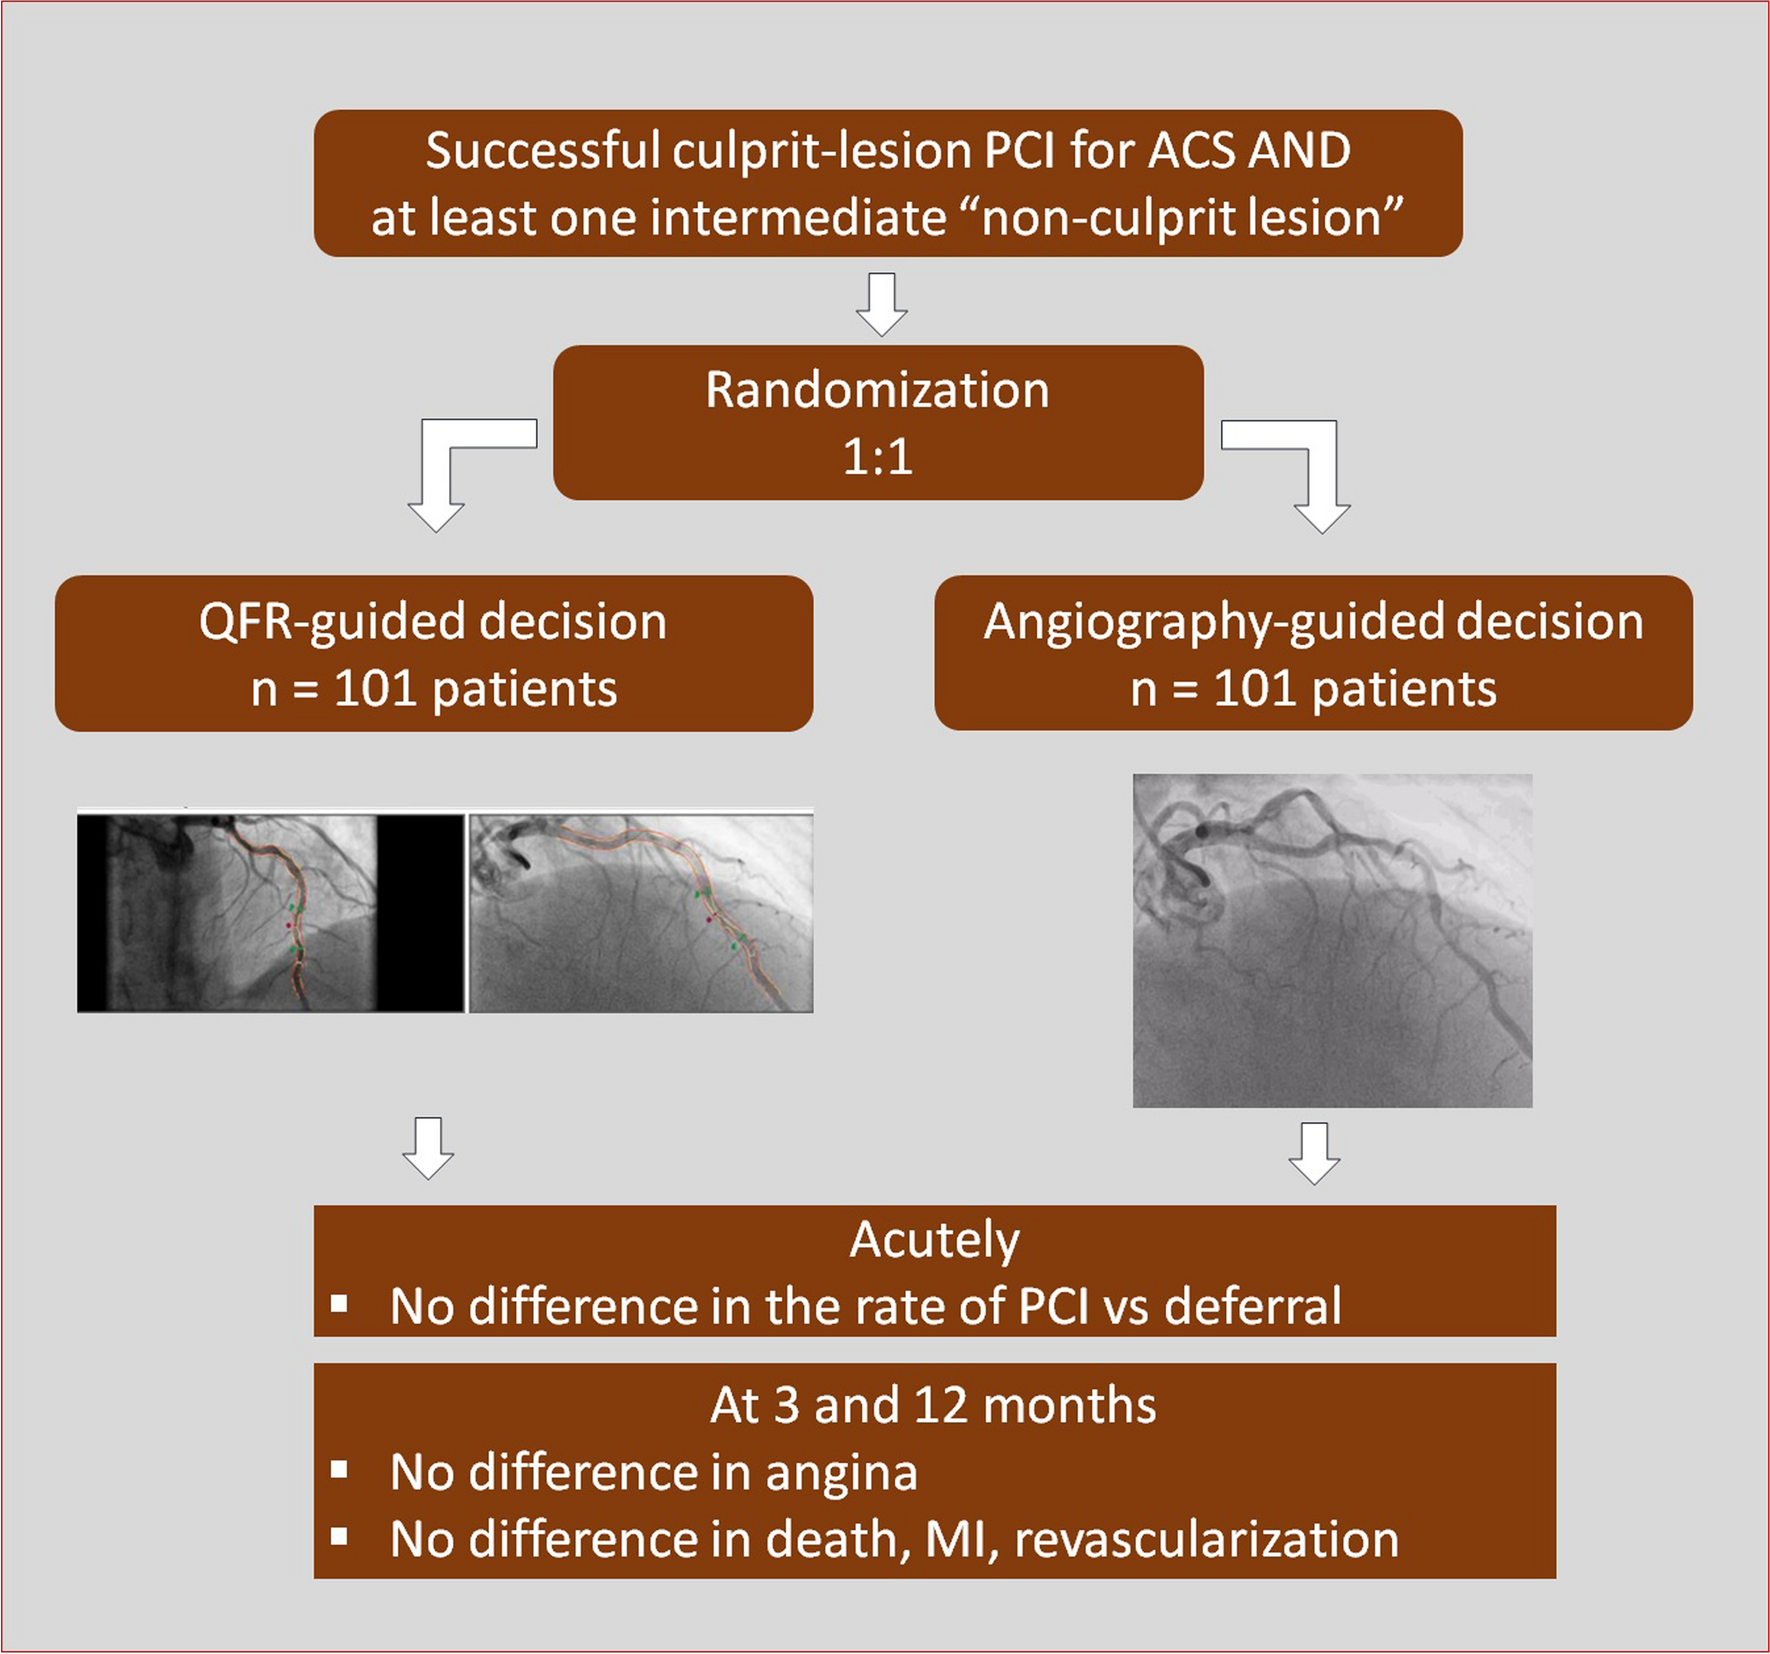 Quantitative flow ratio or angiography for the assessment of non-culprit lesions in acute coronary syndromes, a randomized trial